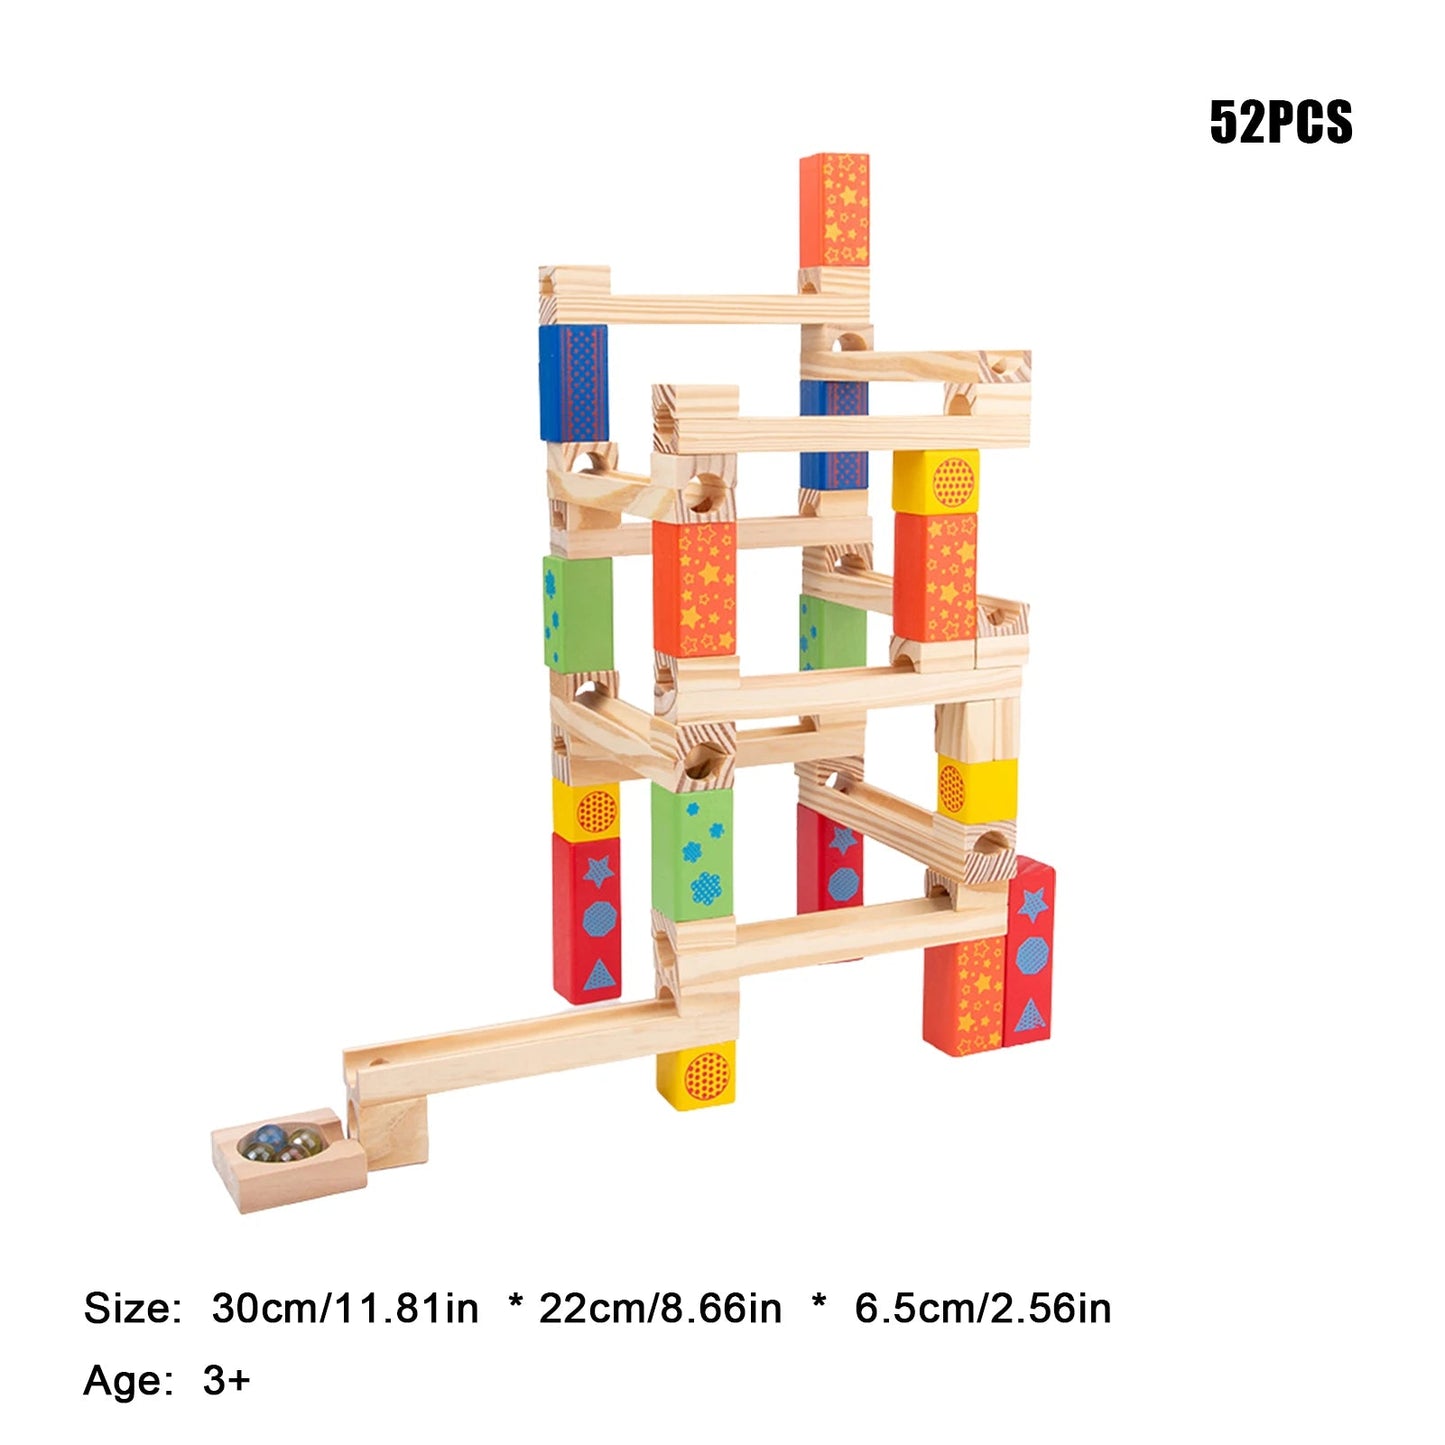 Wooden Marble Race Track Game Marble Runs Toy Construction Building